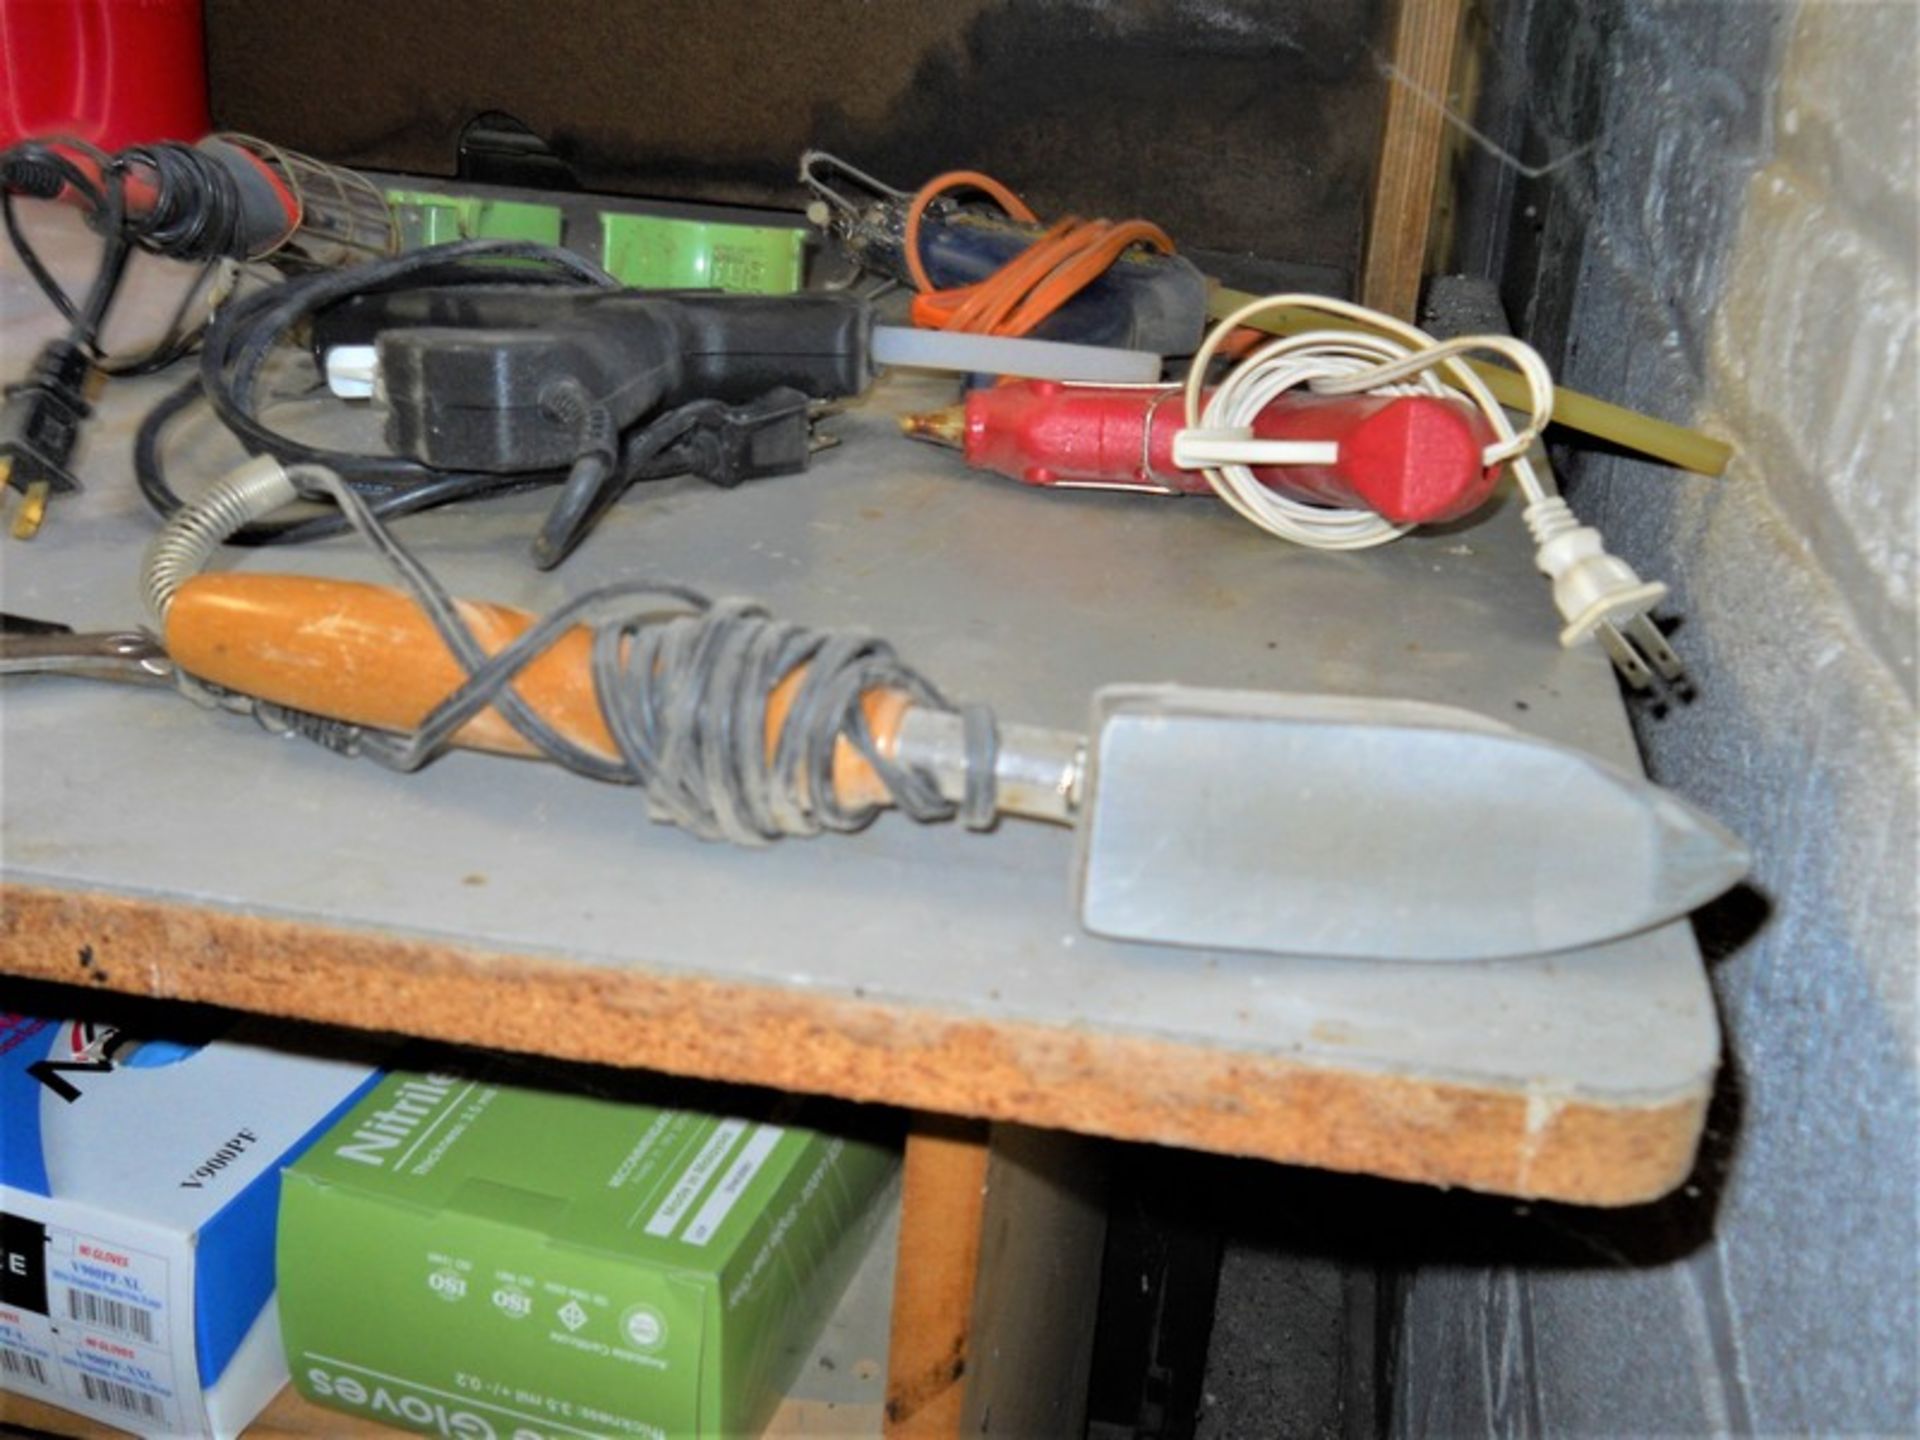 Lot - Shipping & Receiving Department, Including: Scale; Tape Dispenser; Glue Guns; Hand Held Iron - Image 6 of 7